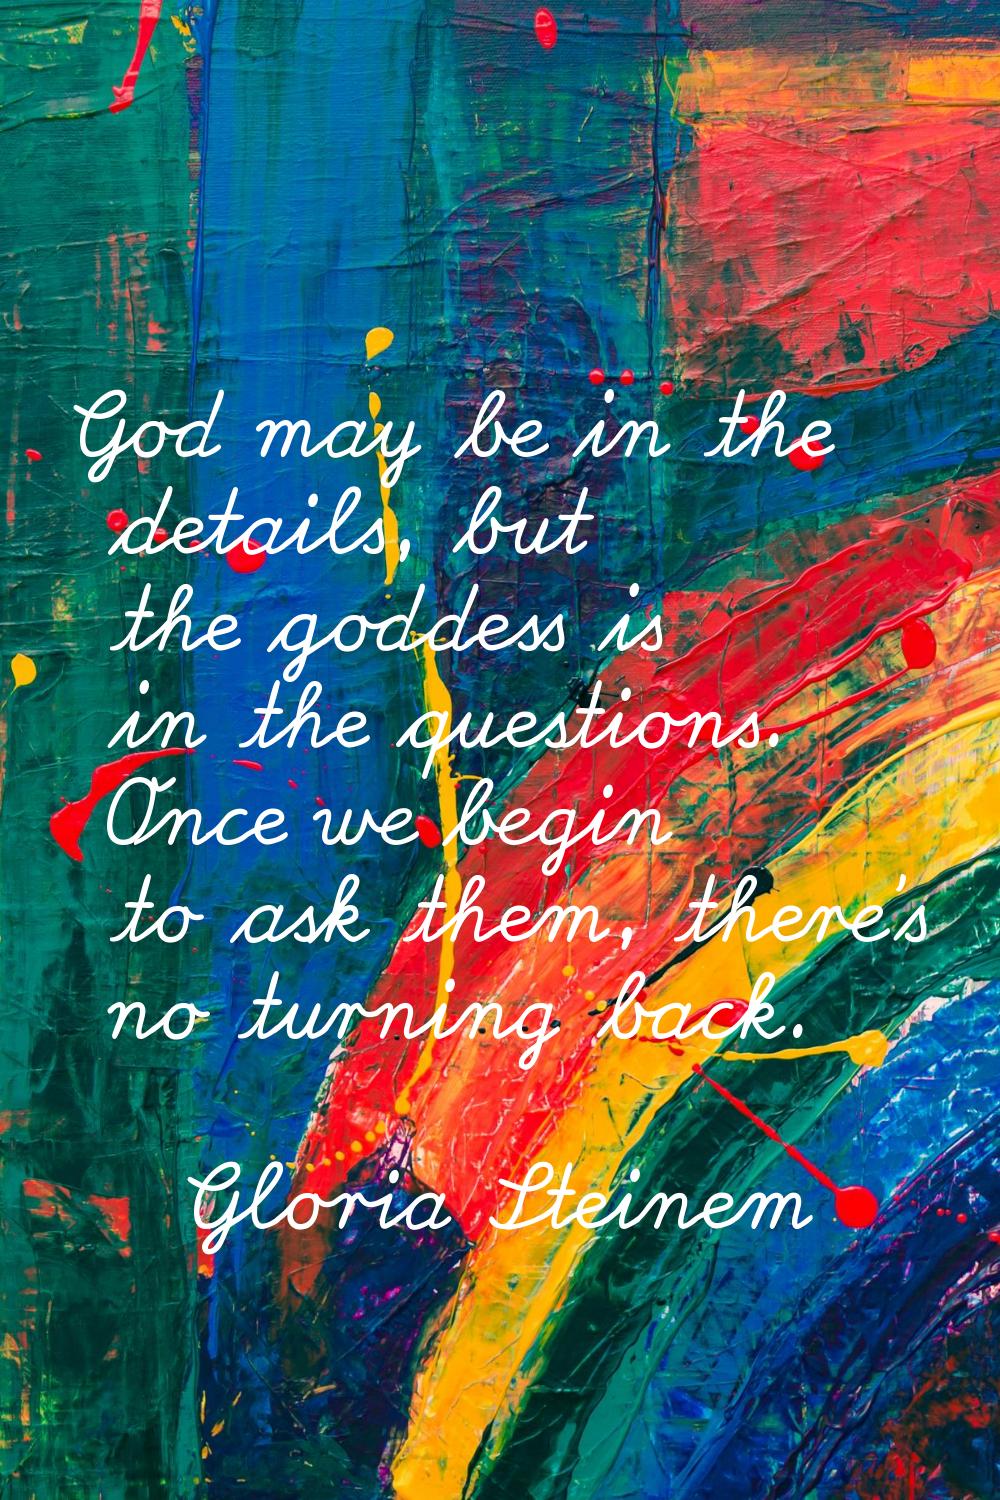 God may be in the details, but the goddess is in the questions. Once we begin to ask them, there's 